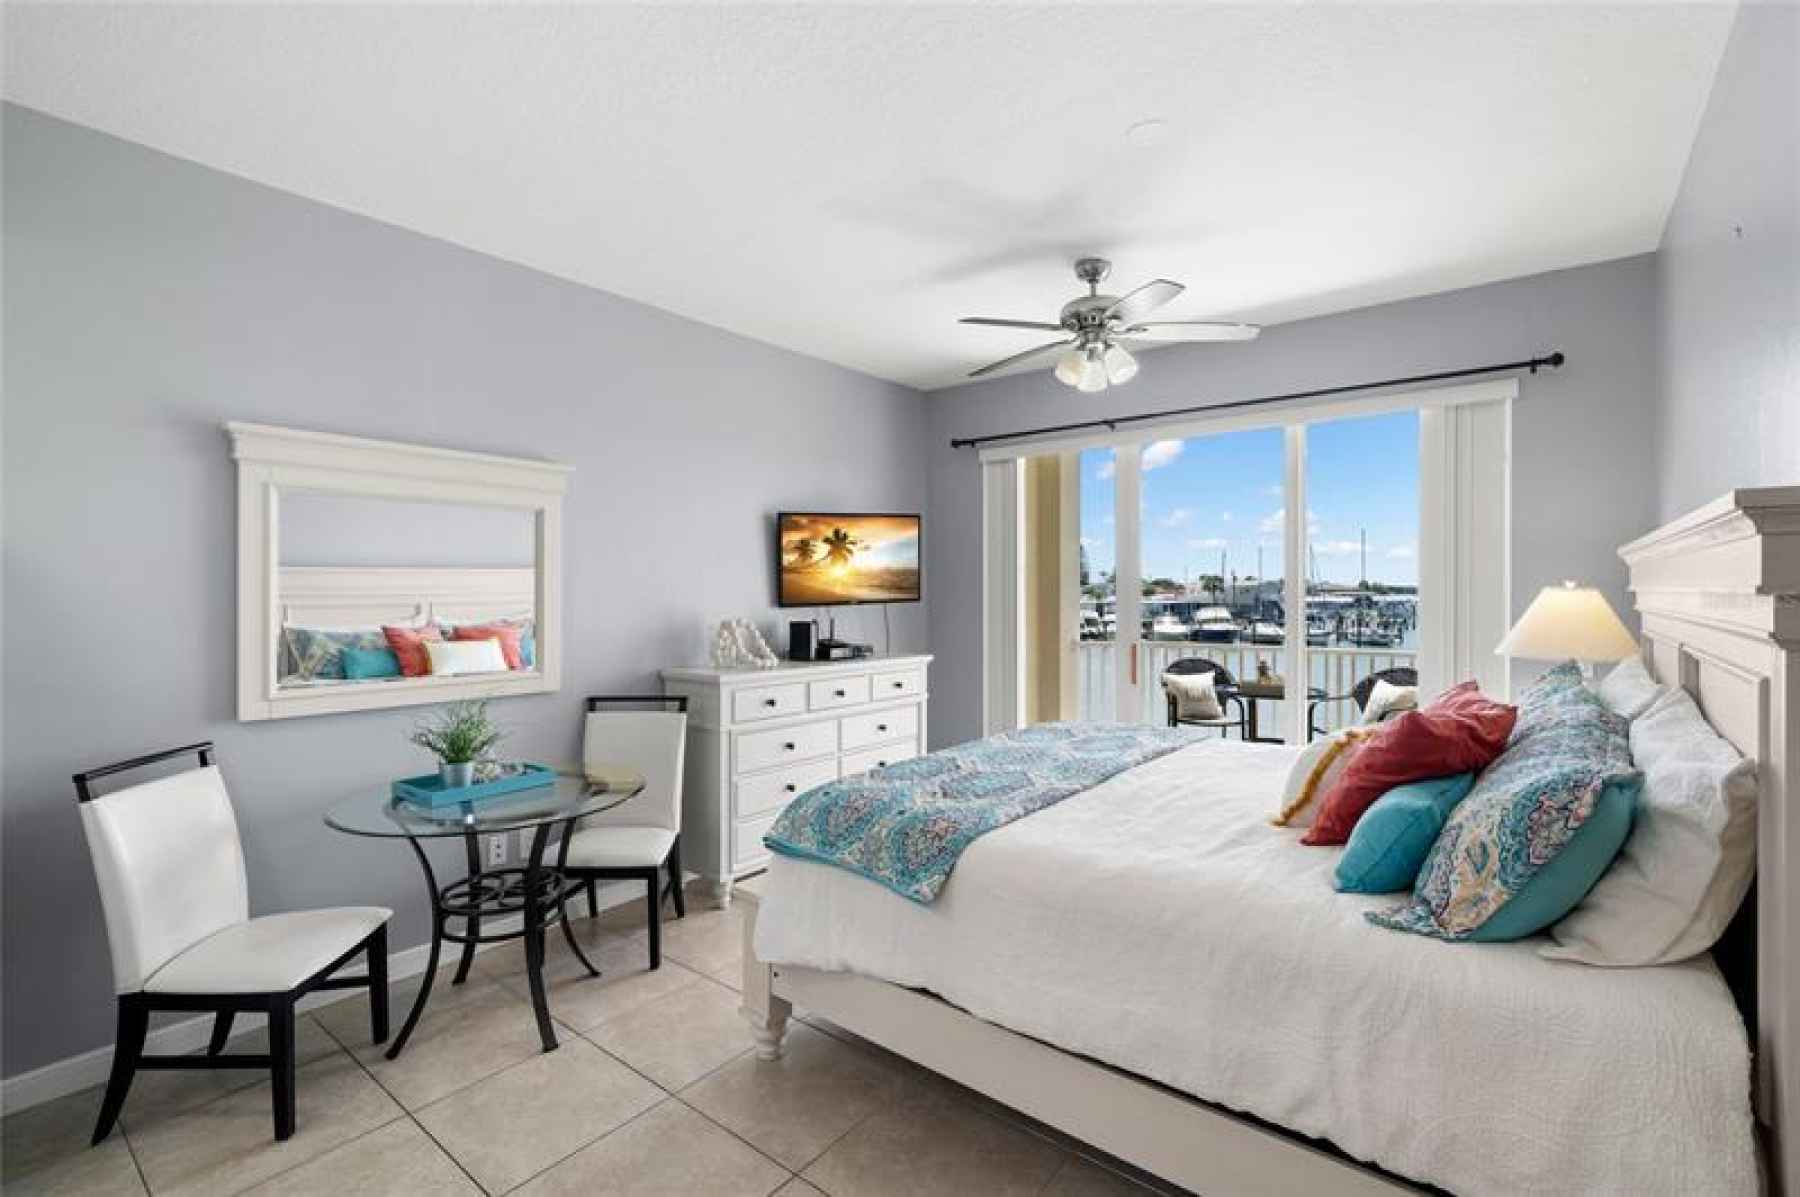 This versatile condo is perfect as a weekend getaway, winter escape or investment property (1-7 day 